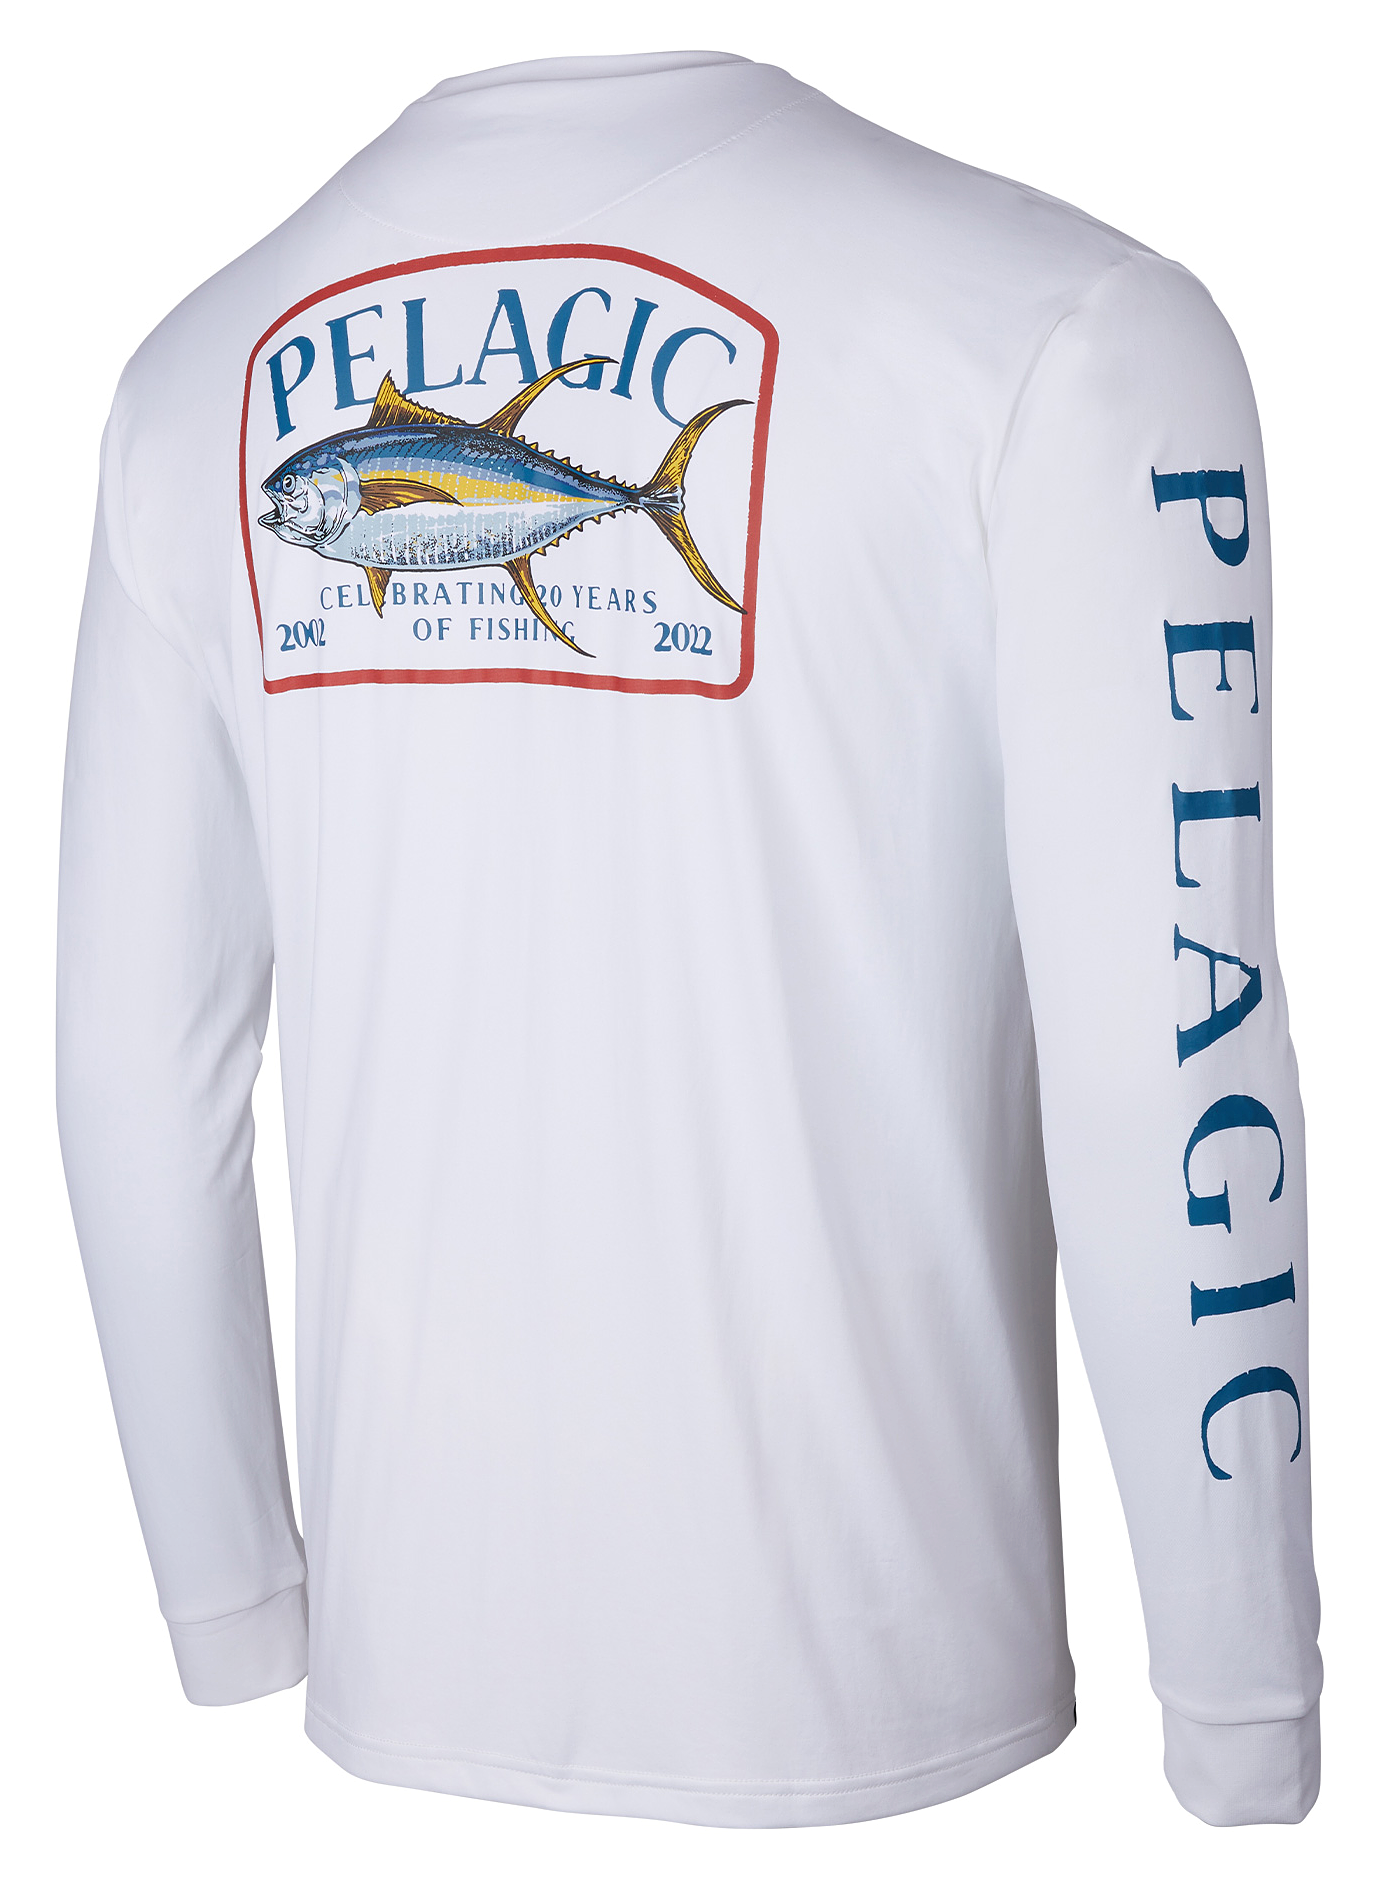 PELAGIC Mens Long Sleeve Fishing Full Sleeve T Shirt With UV Protection And  Breathable Fabric Camisa Pesca 220815 From Zhi09, $18.63